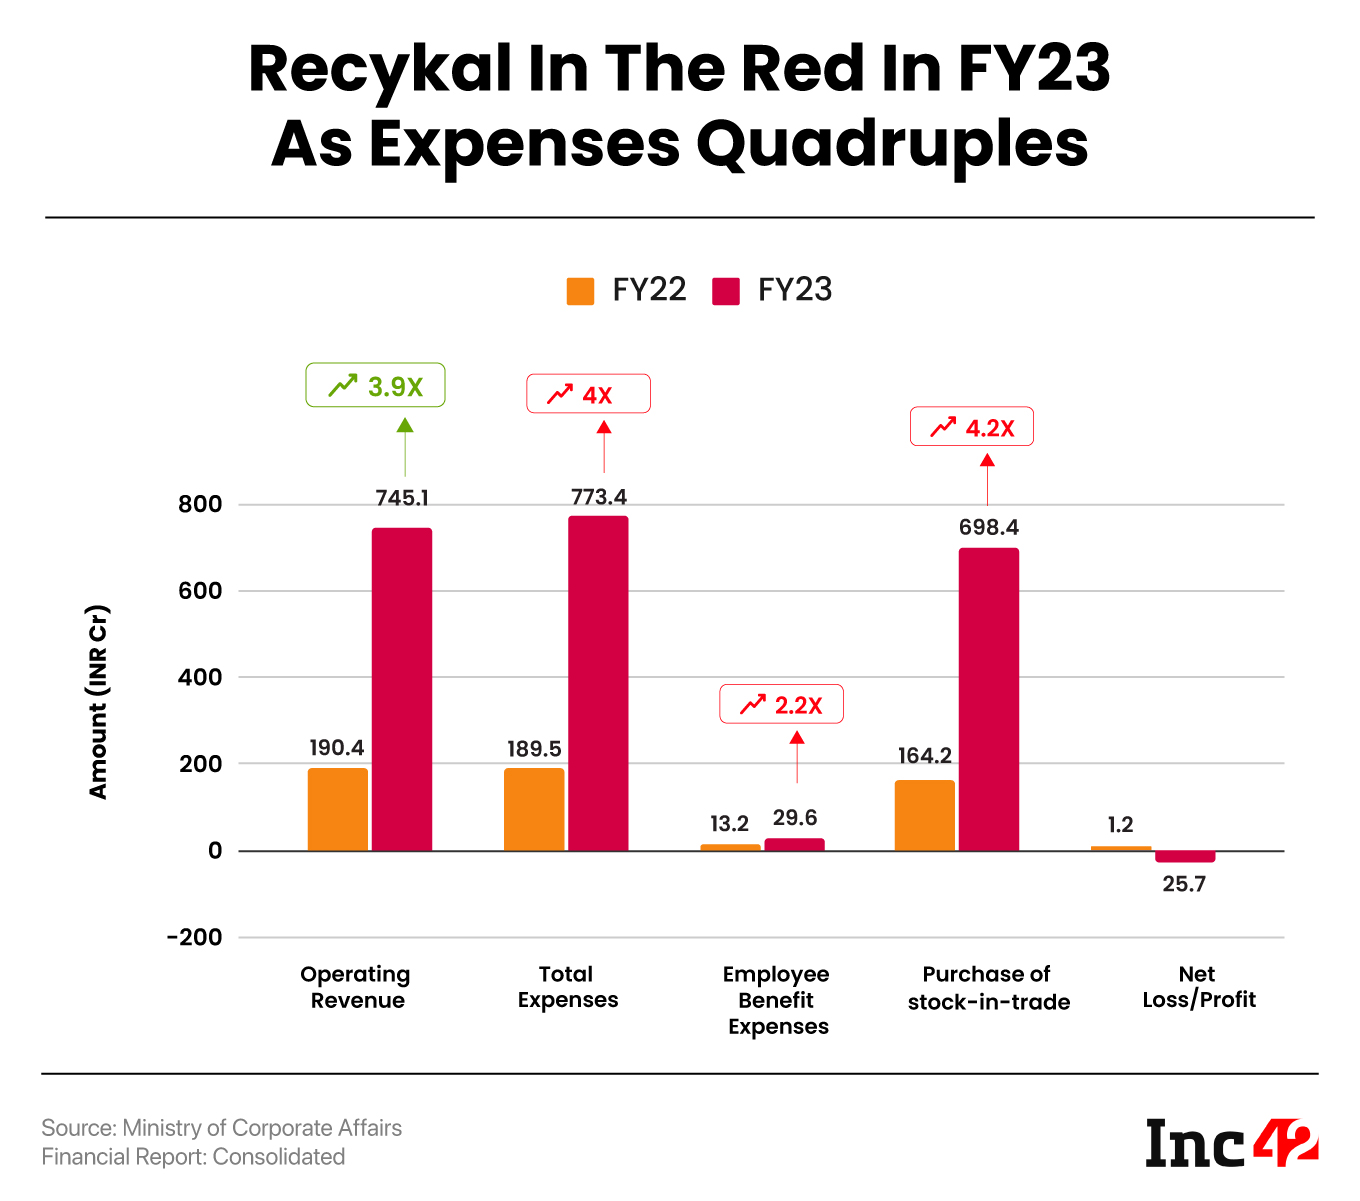 The operating revenue of Recykal jumped 291% to INR 745.1 Cr in FY23 from INR 190.4 Cr in the previous year